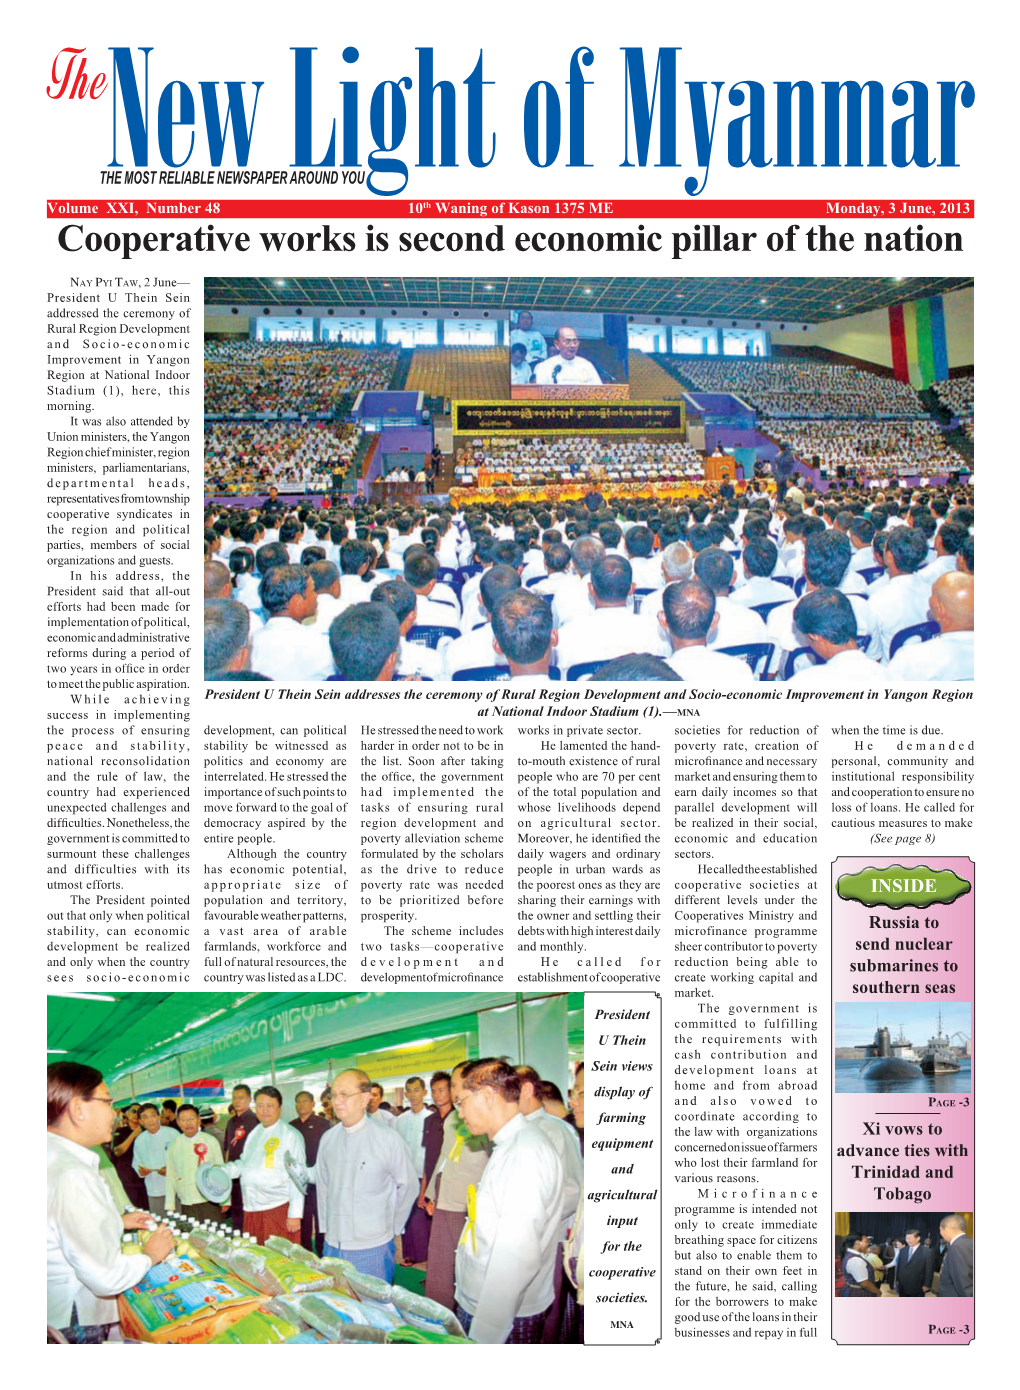 Cooperative Works Is Second Economic Pillar of the Nation